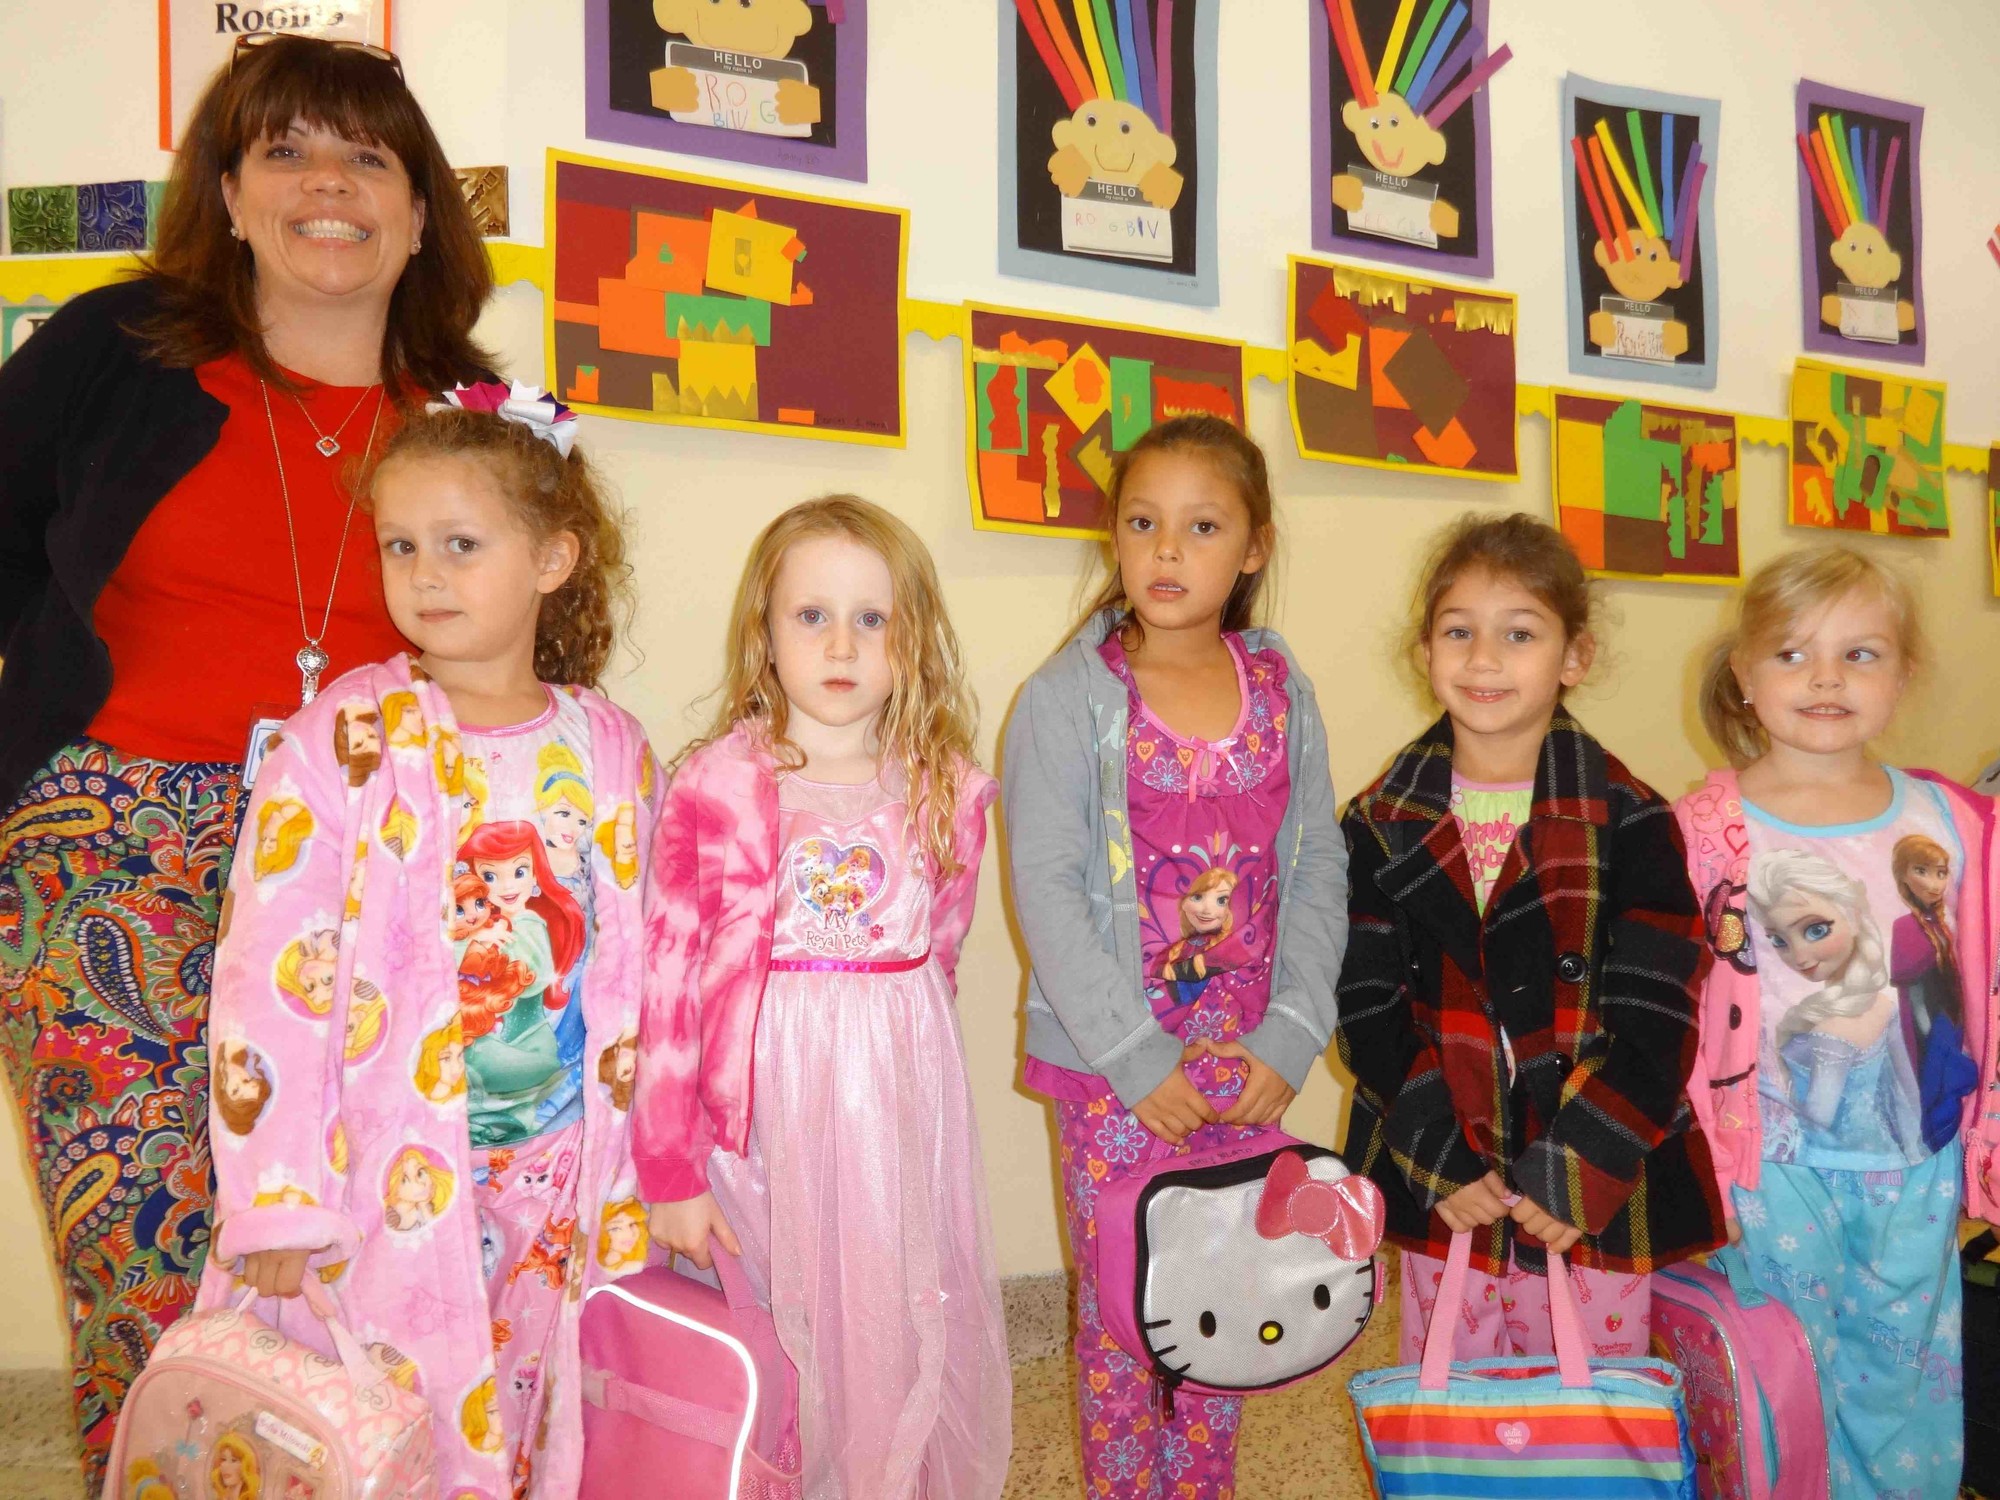 Reinhard Principal Patricia Castine celebrated Pajama Day with students during the school’s annual Spirit Week.